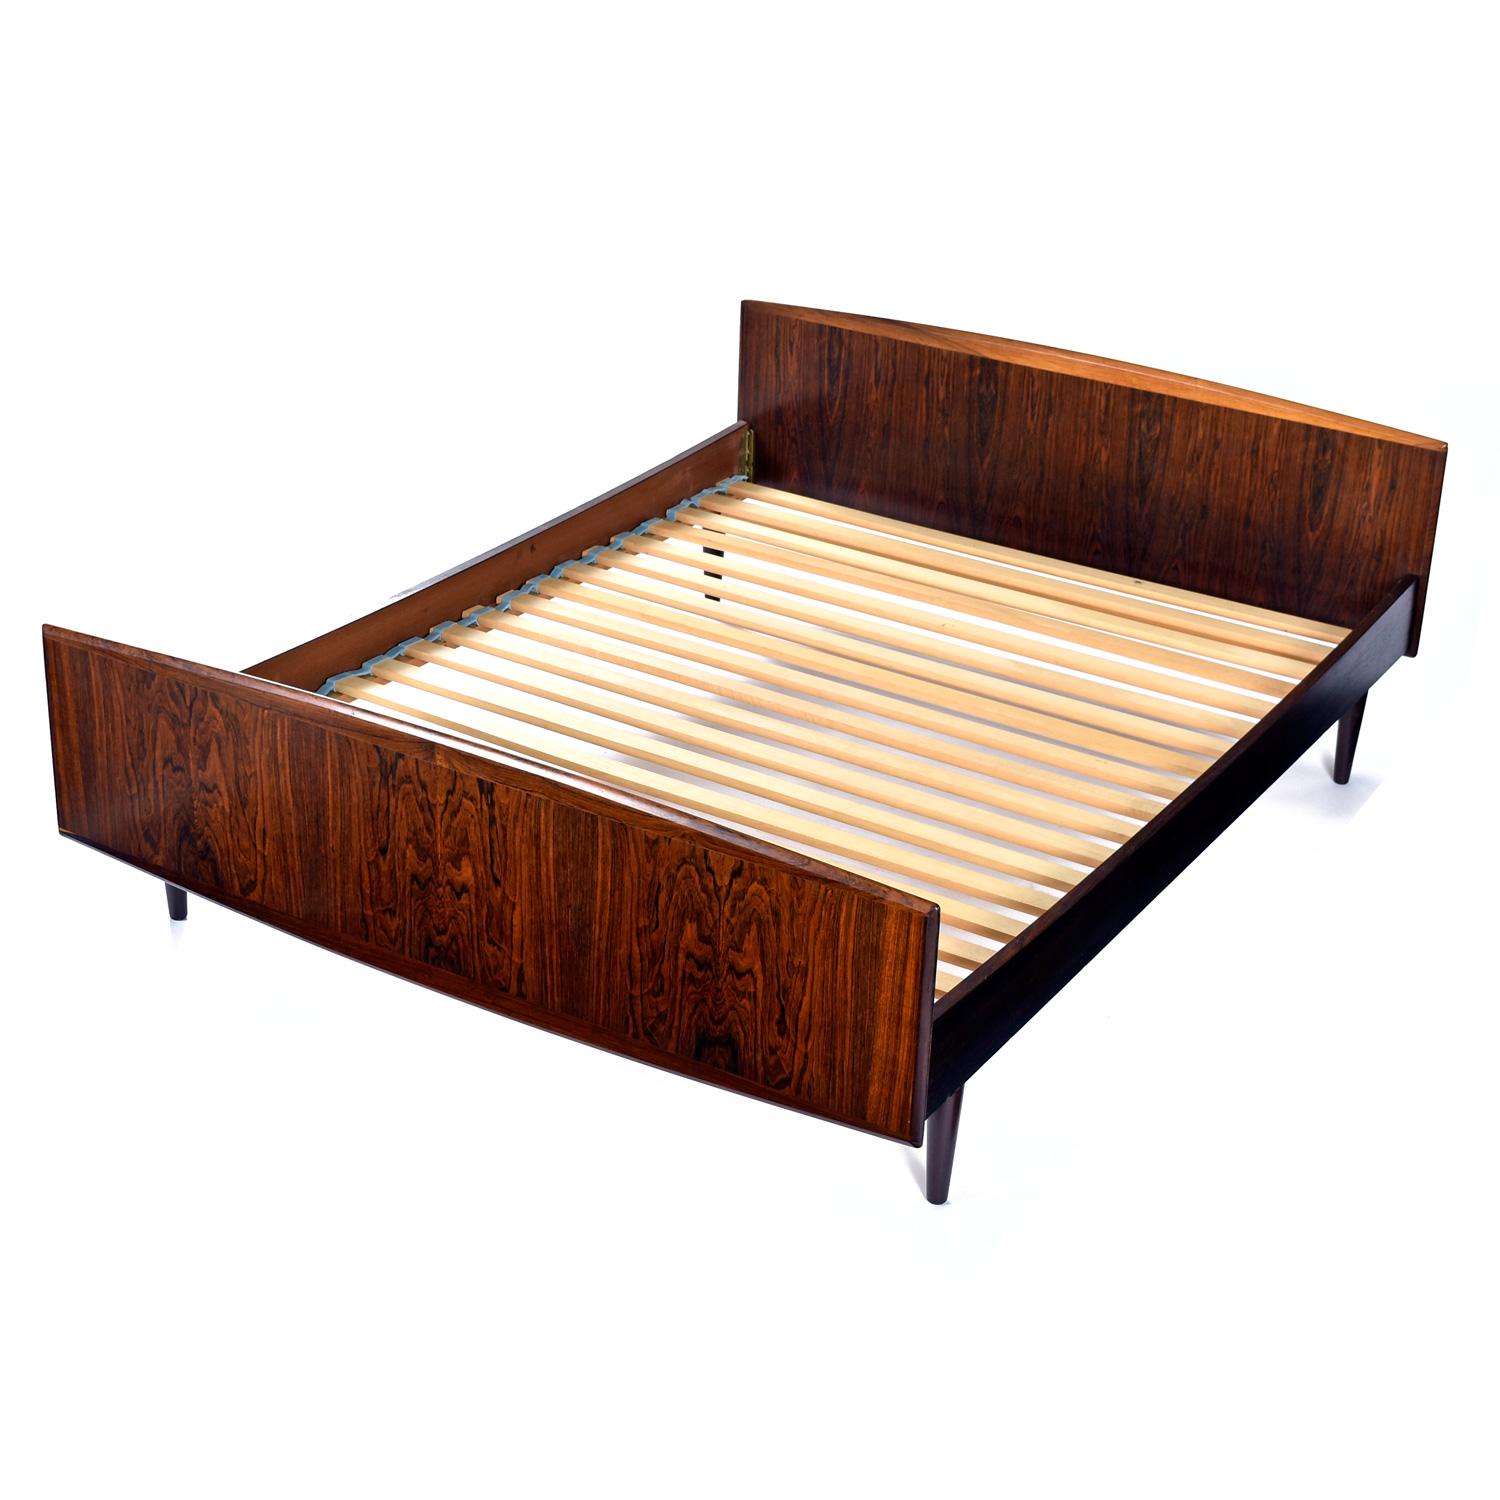 Vintage Danish Rosewood Queen Platform Bed by for Sannemanns In Good Condition For Sale In Chattanooga, TN